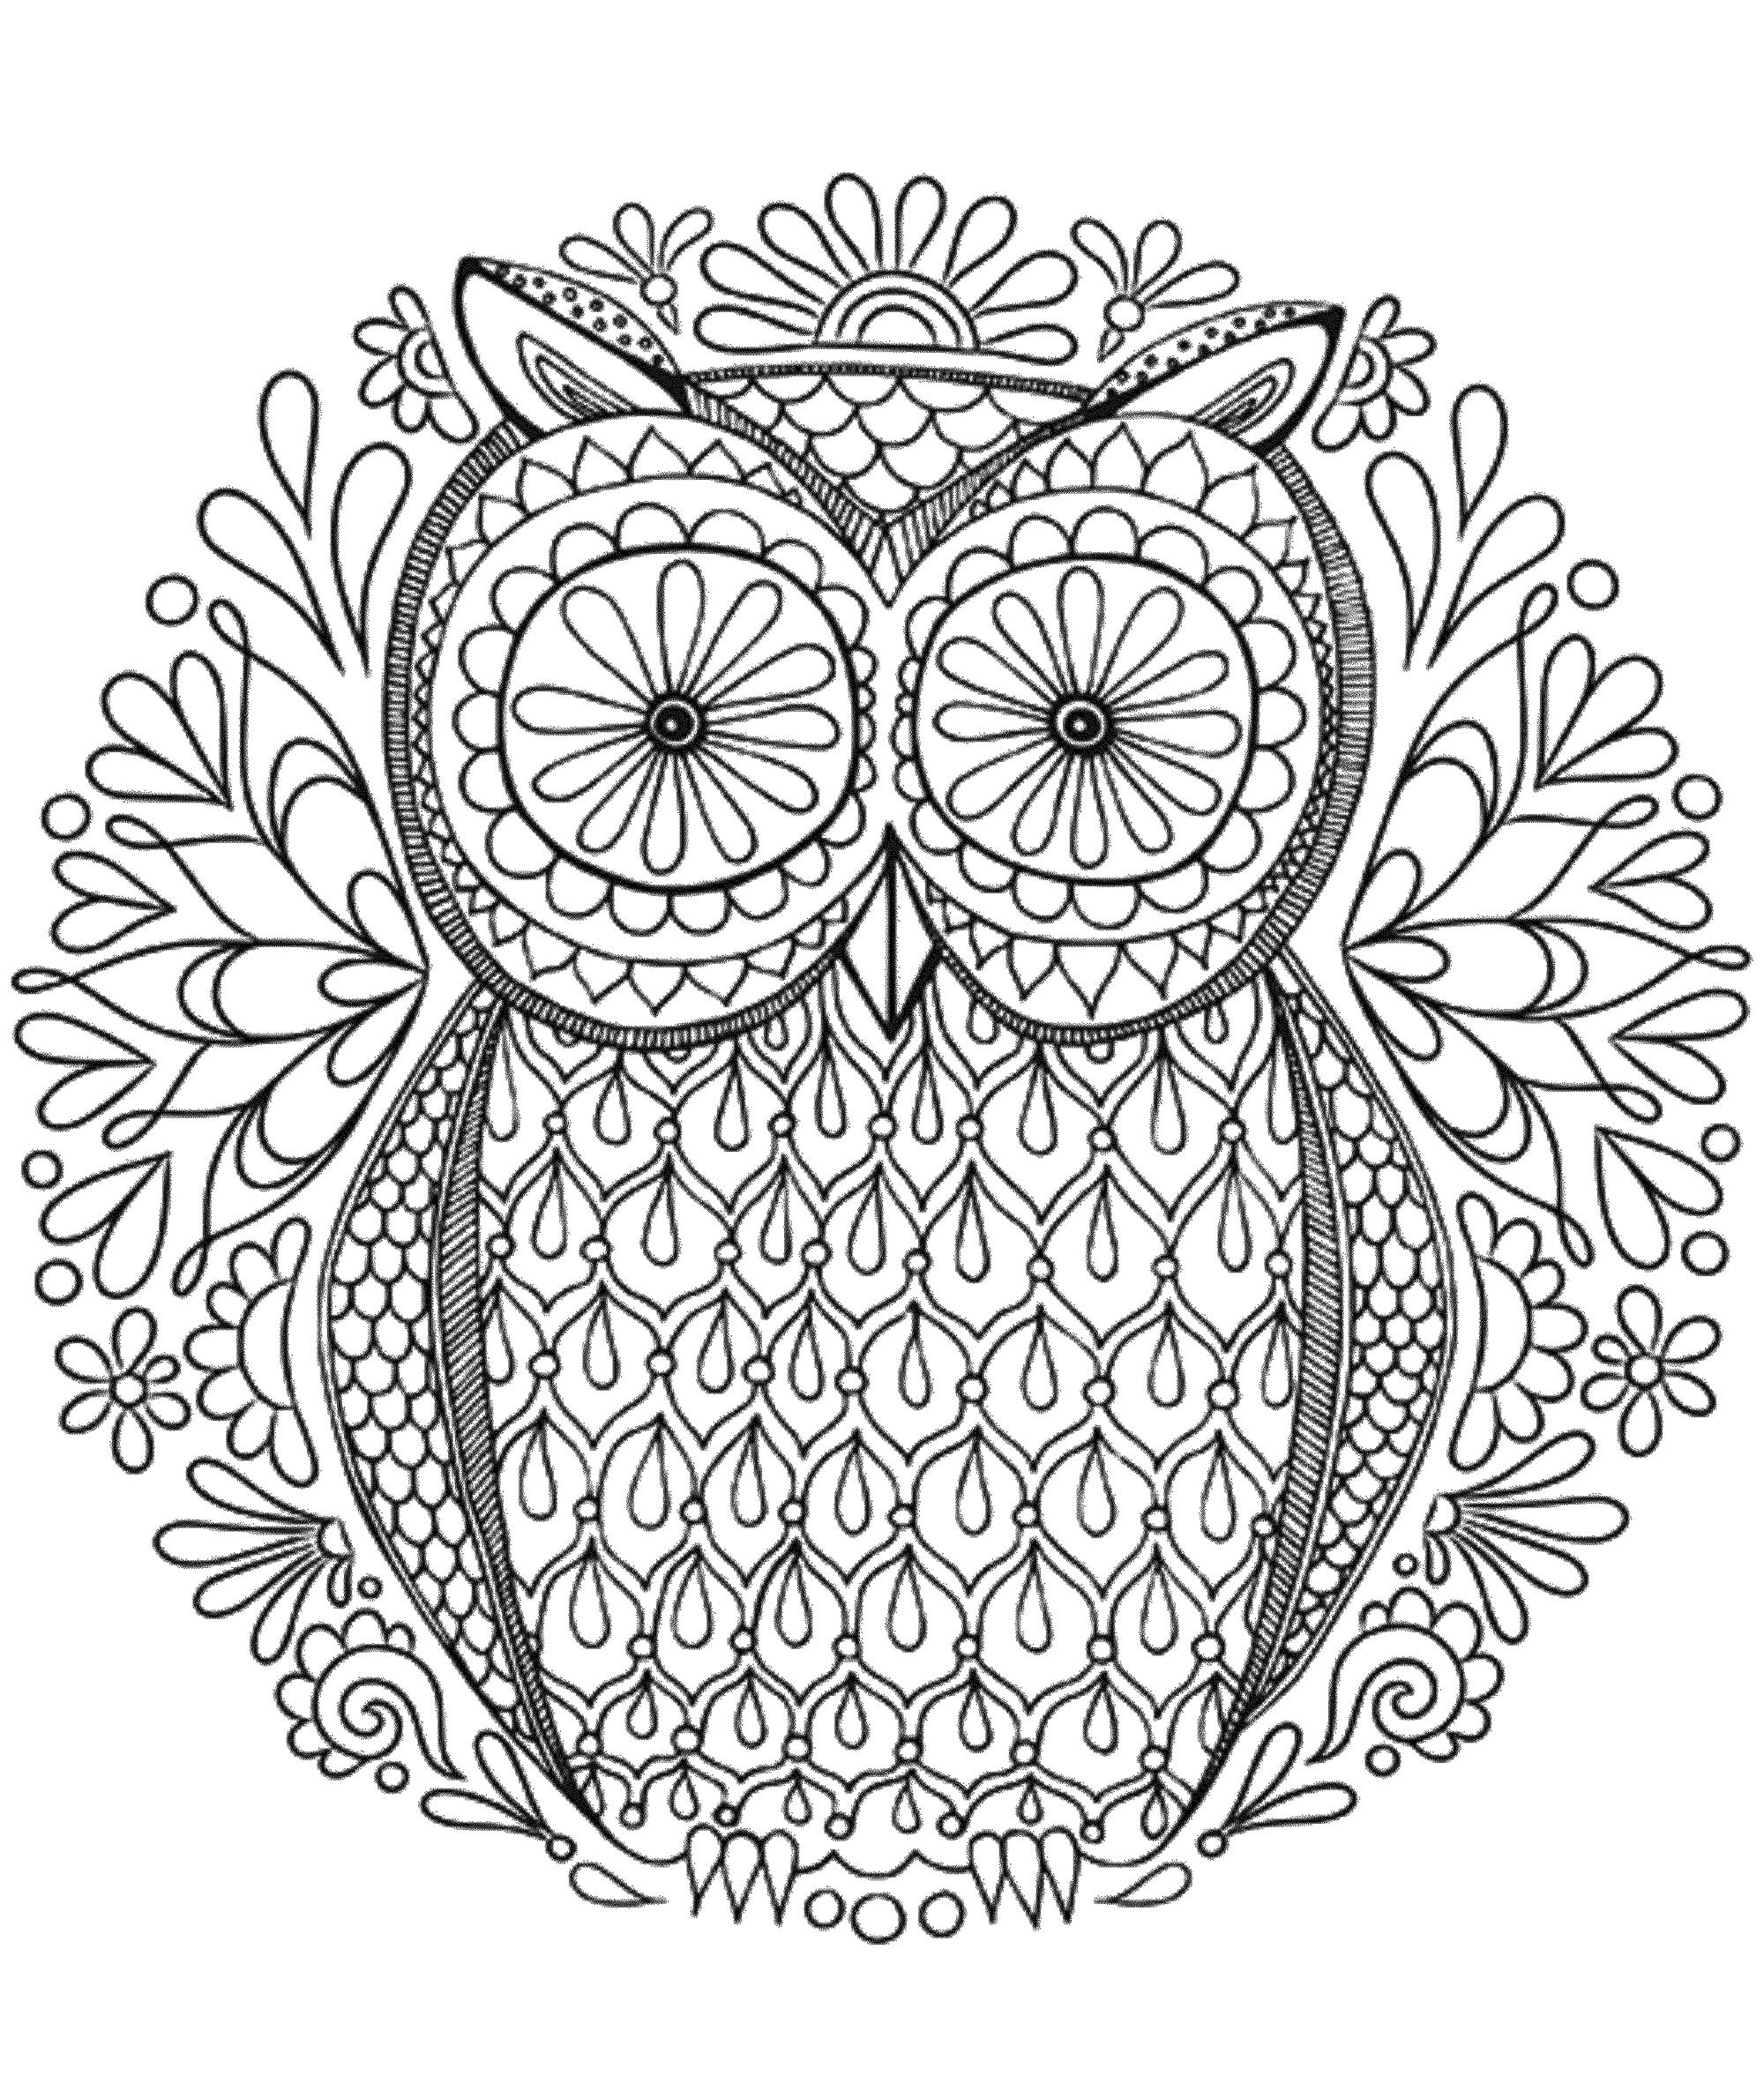 Download Mandala to download in pdf 6 - M&alas Adult Coloring Pages